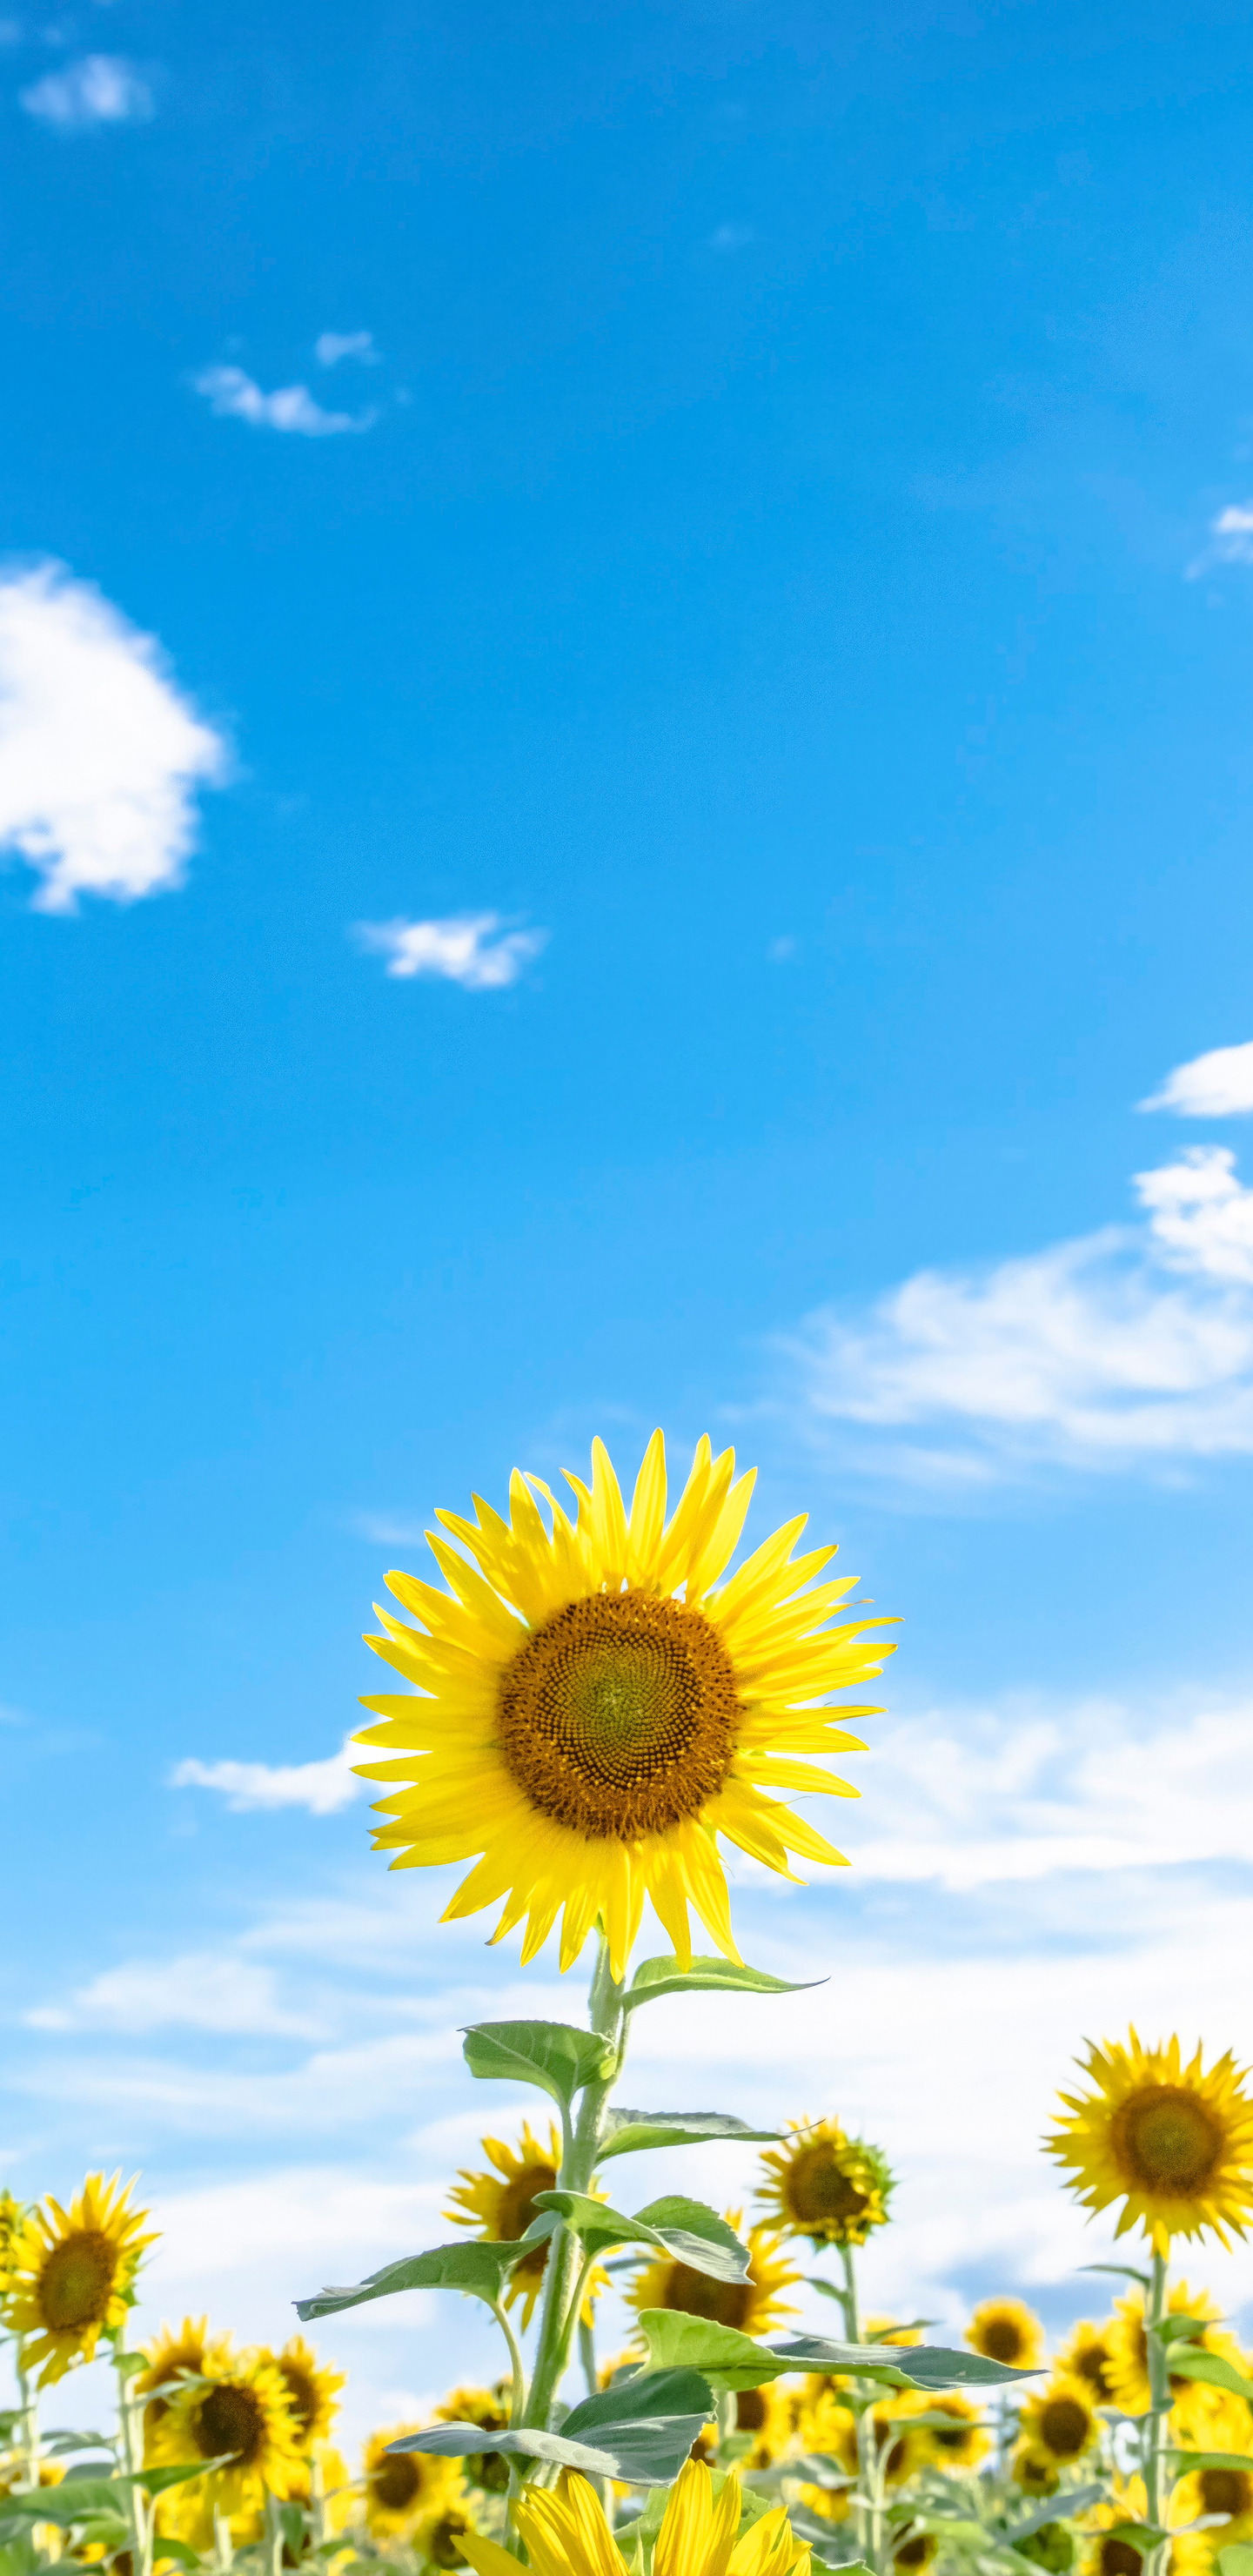 Sunflowers And Blue Sky Wallpaper In 1440x2960 Resolution